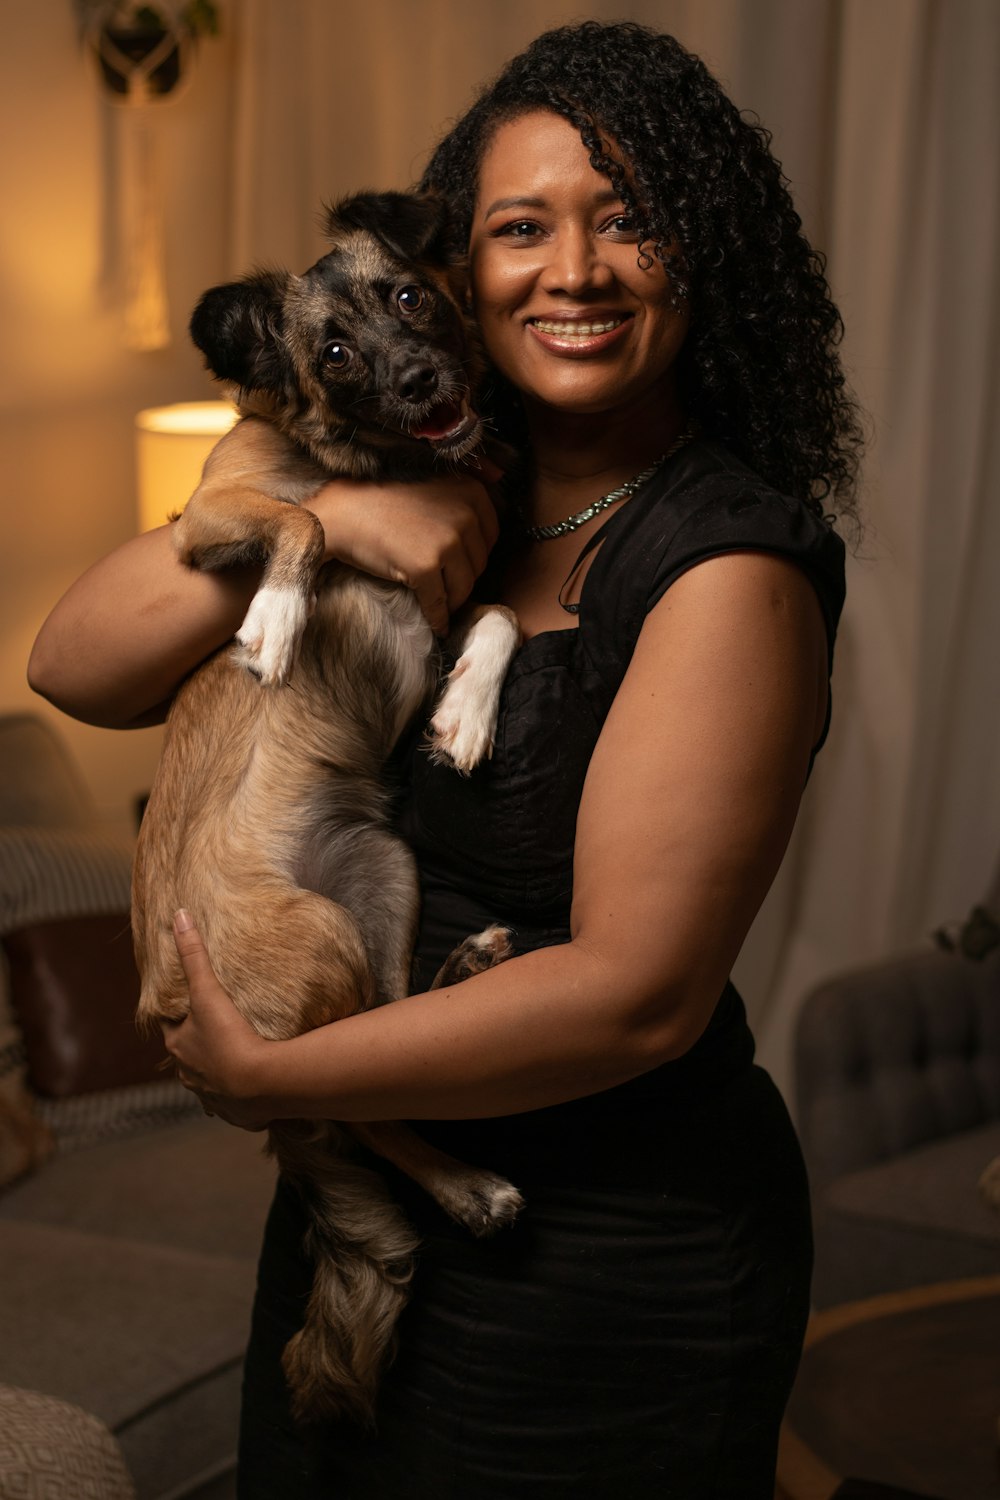 Woman in black tank top holding brown and black short coated small dog  photo – Free Animal Image on Unsplash